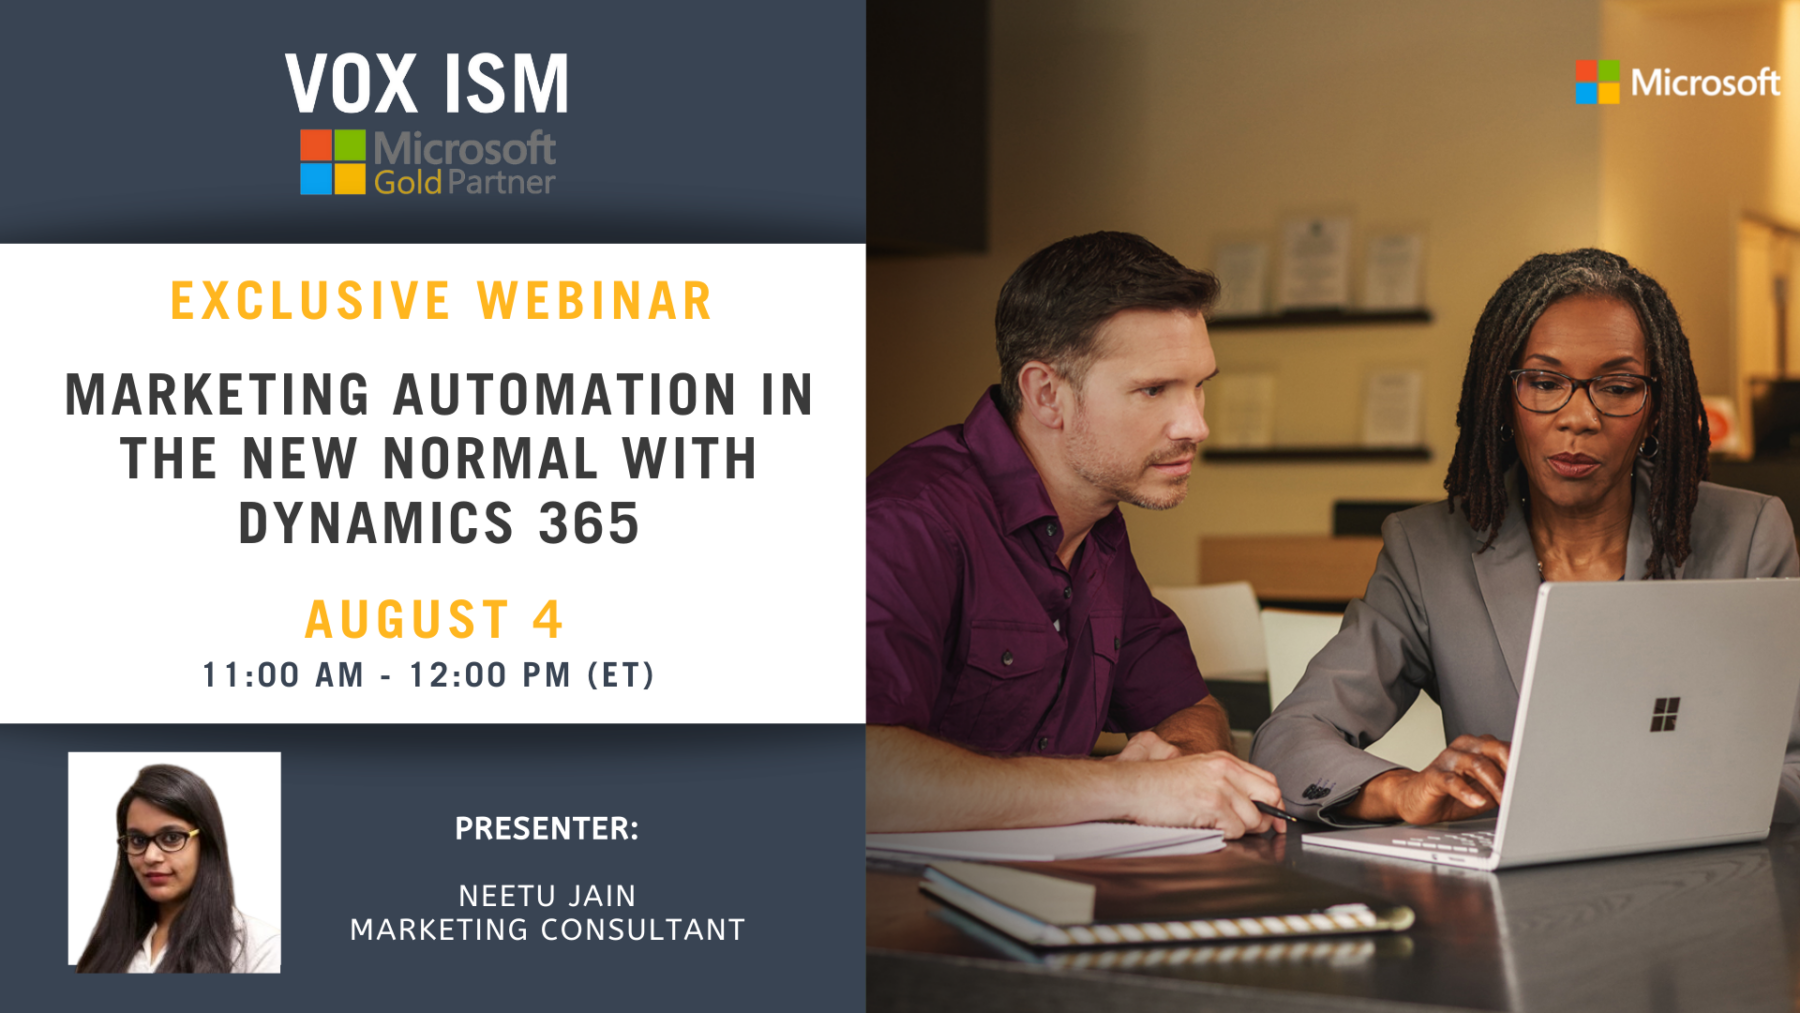 Marketing Automation in the “New Normal” with Dynamics 365 - August 4 - Webinar